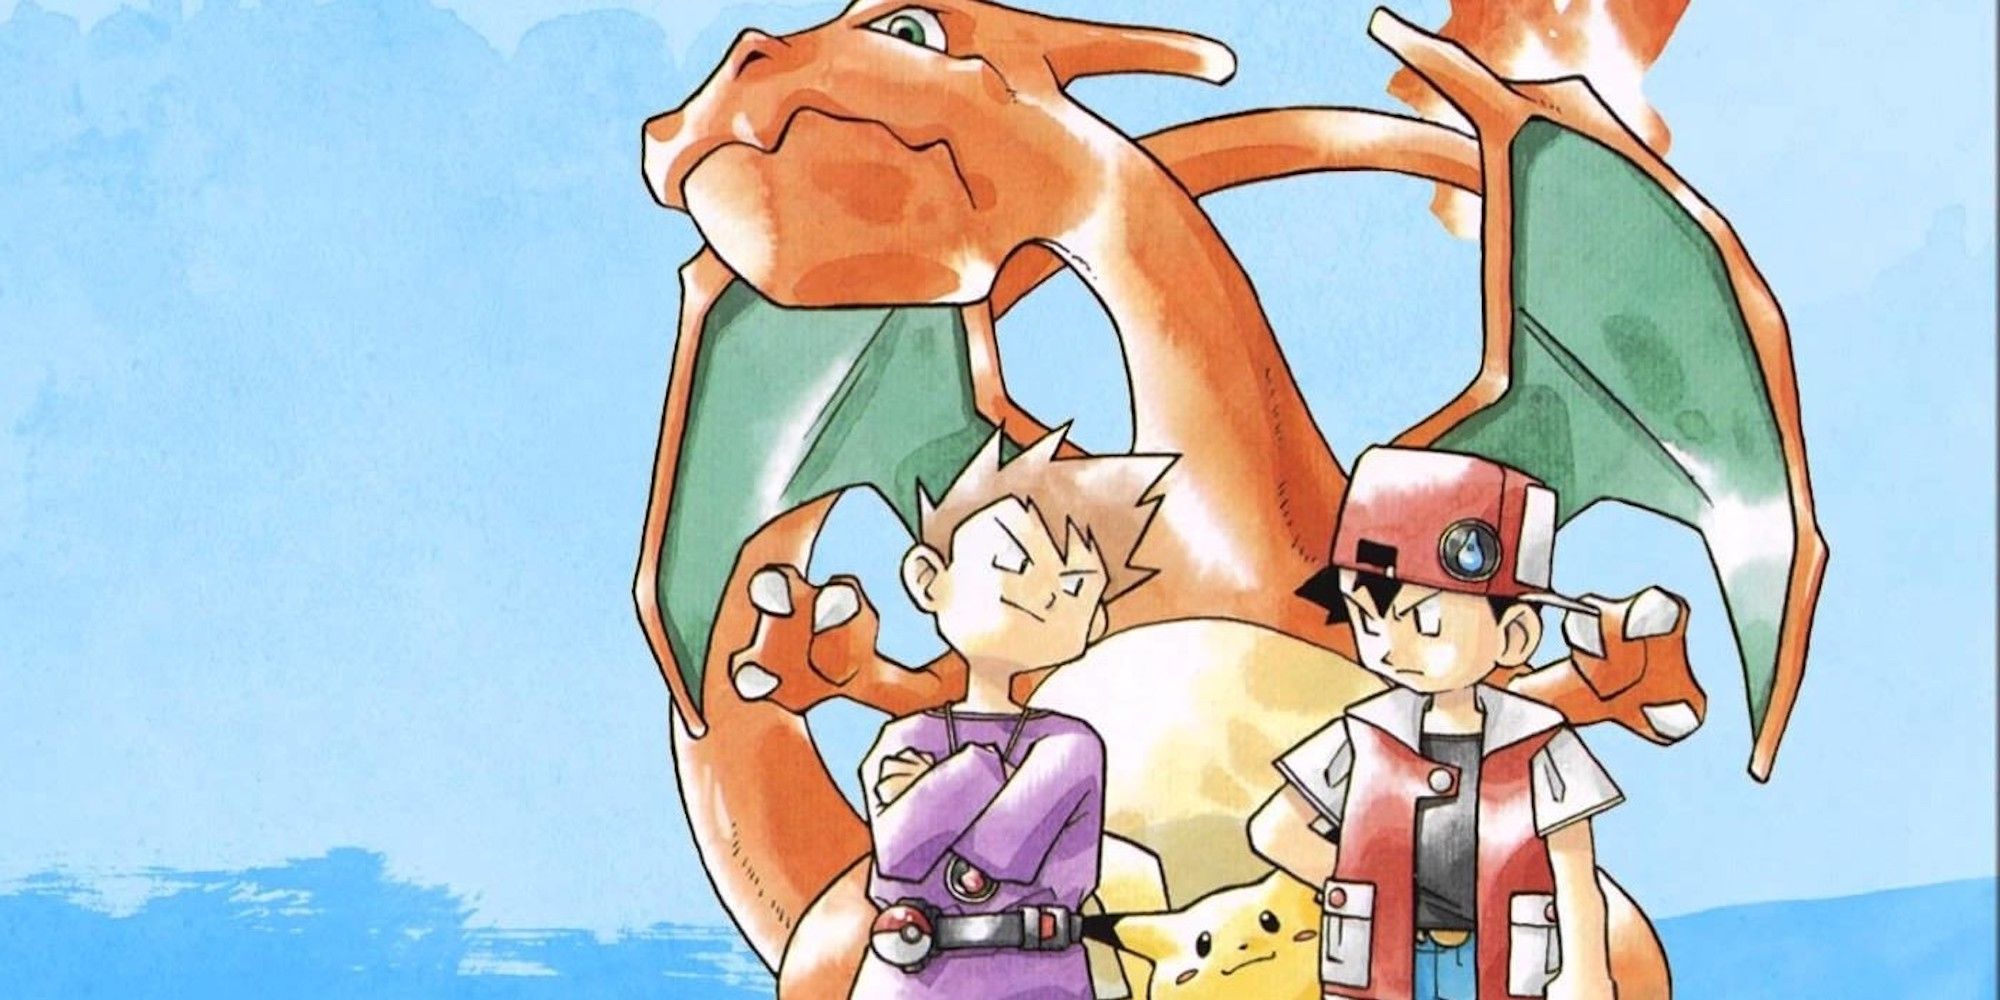 Promo art featuring characters from Pokemon Red/Blue